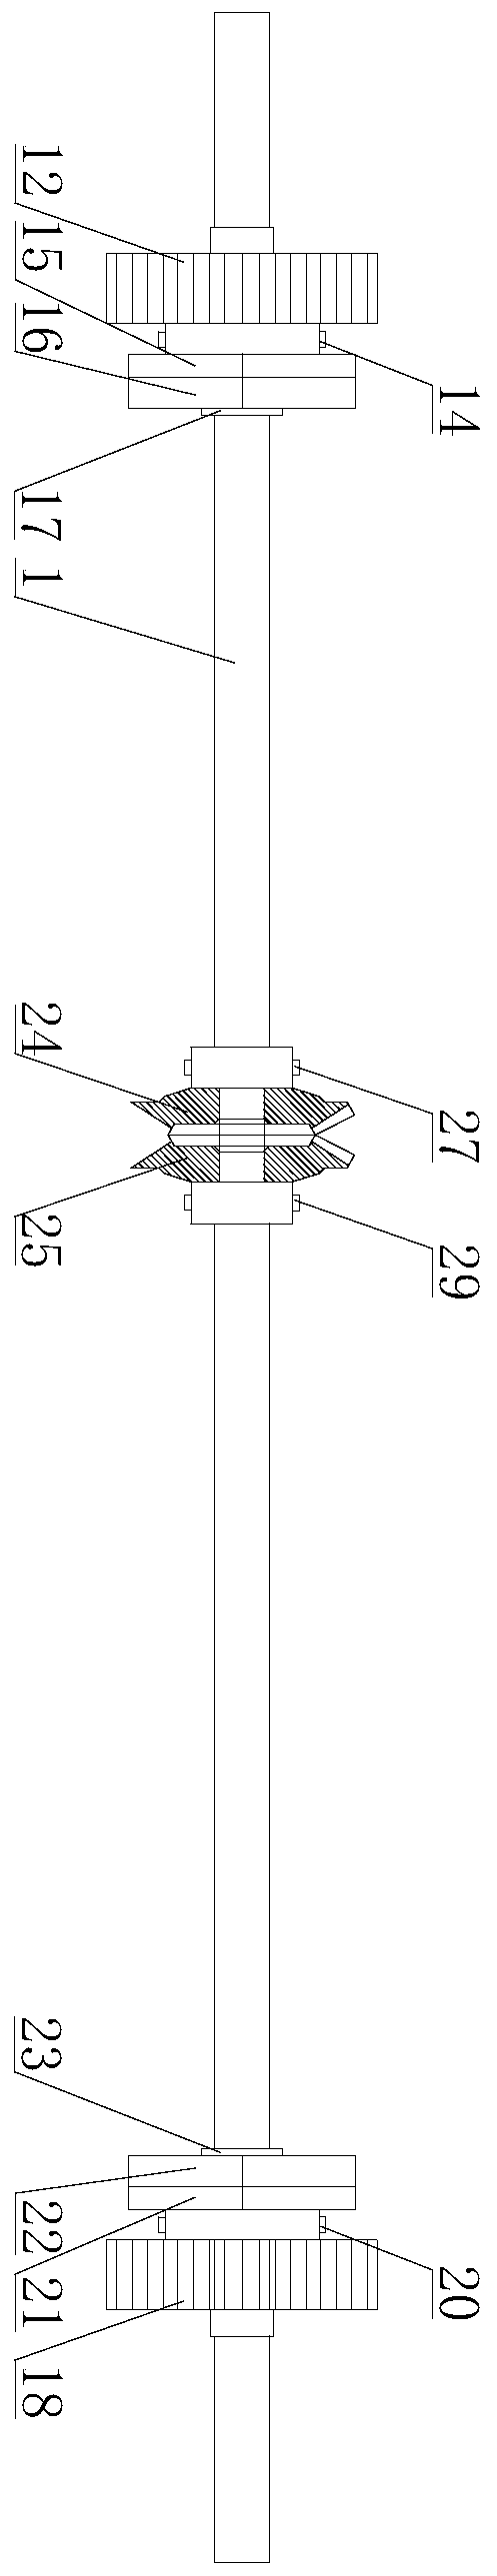 Device and method for mounting E-shaped springs of neck movement of massage chair